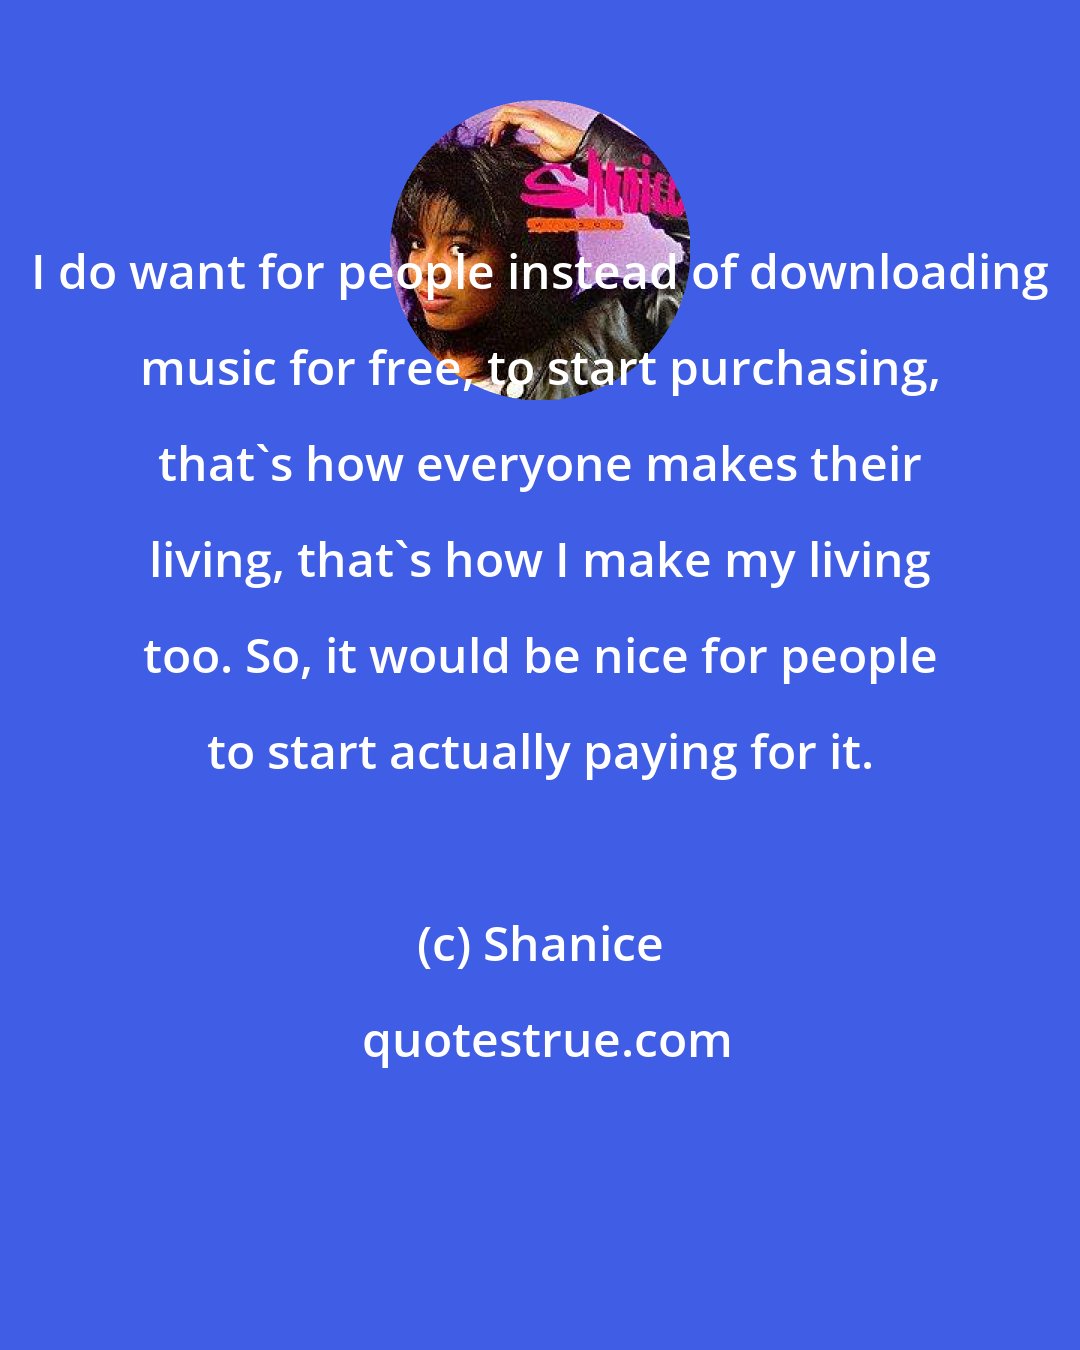 Shanice: I do want for people instead of downloading music for free, to start purchasing, that's how everyone makes their living, that's how I make my living too. So, it would be nice for people to start actually paying for it.